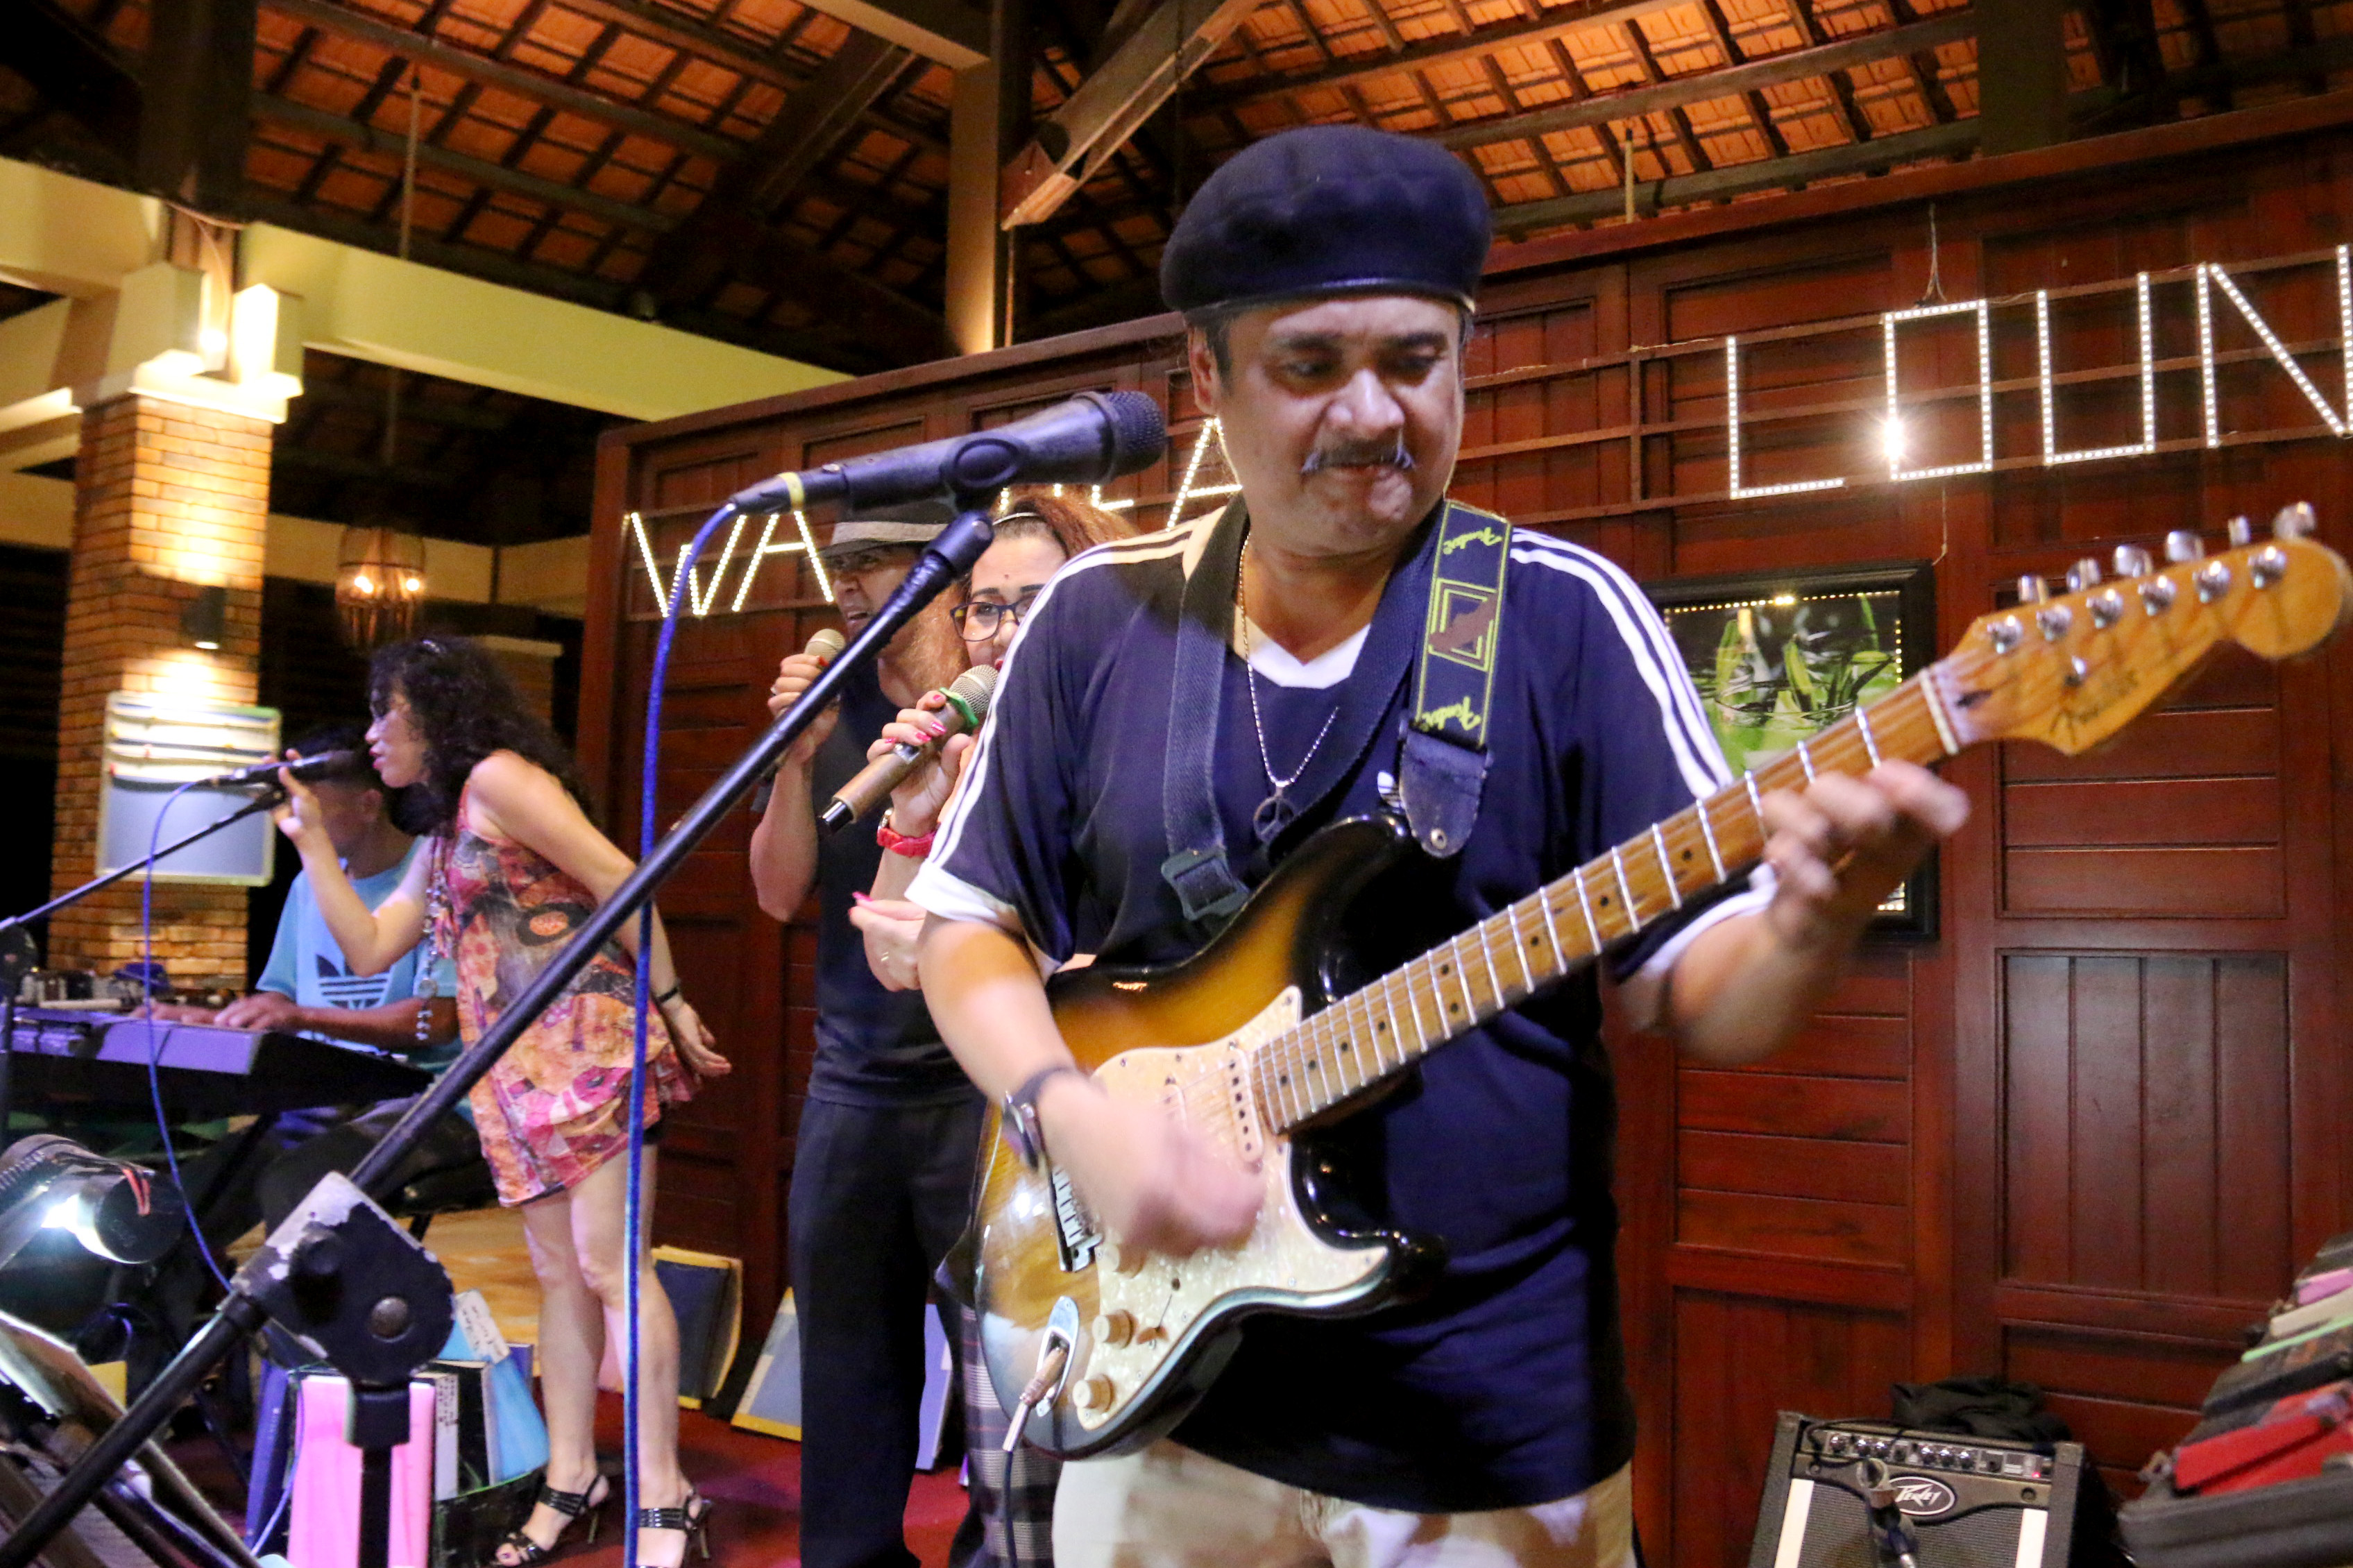 Louell Yamba (R) play bass for other members of Stardust band to sing at a gig at a resort in Mui Ne on January 29, 2018. Photo: Tuoi Tre